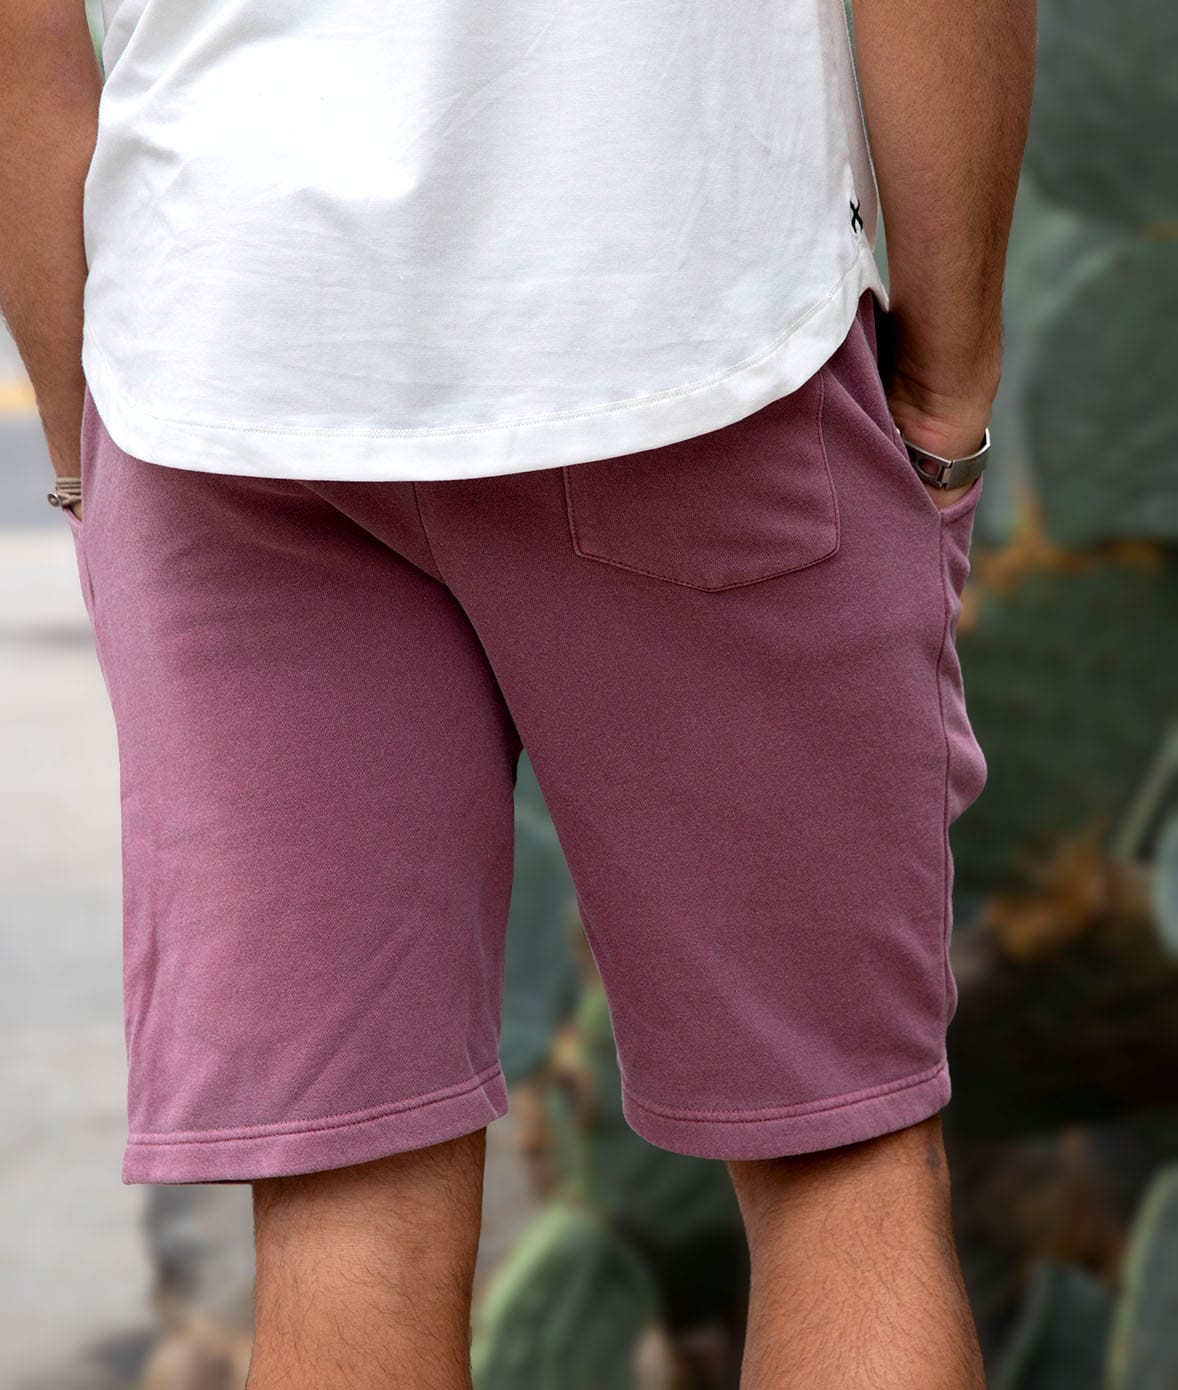 Men's Ridiculously Soft Pigment-Dyed Shorts Worn by Model